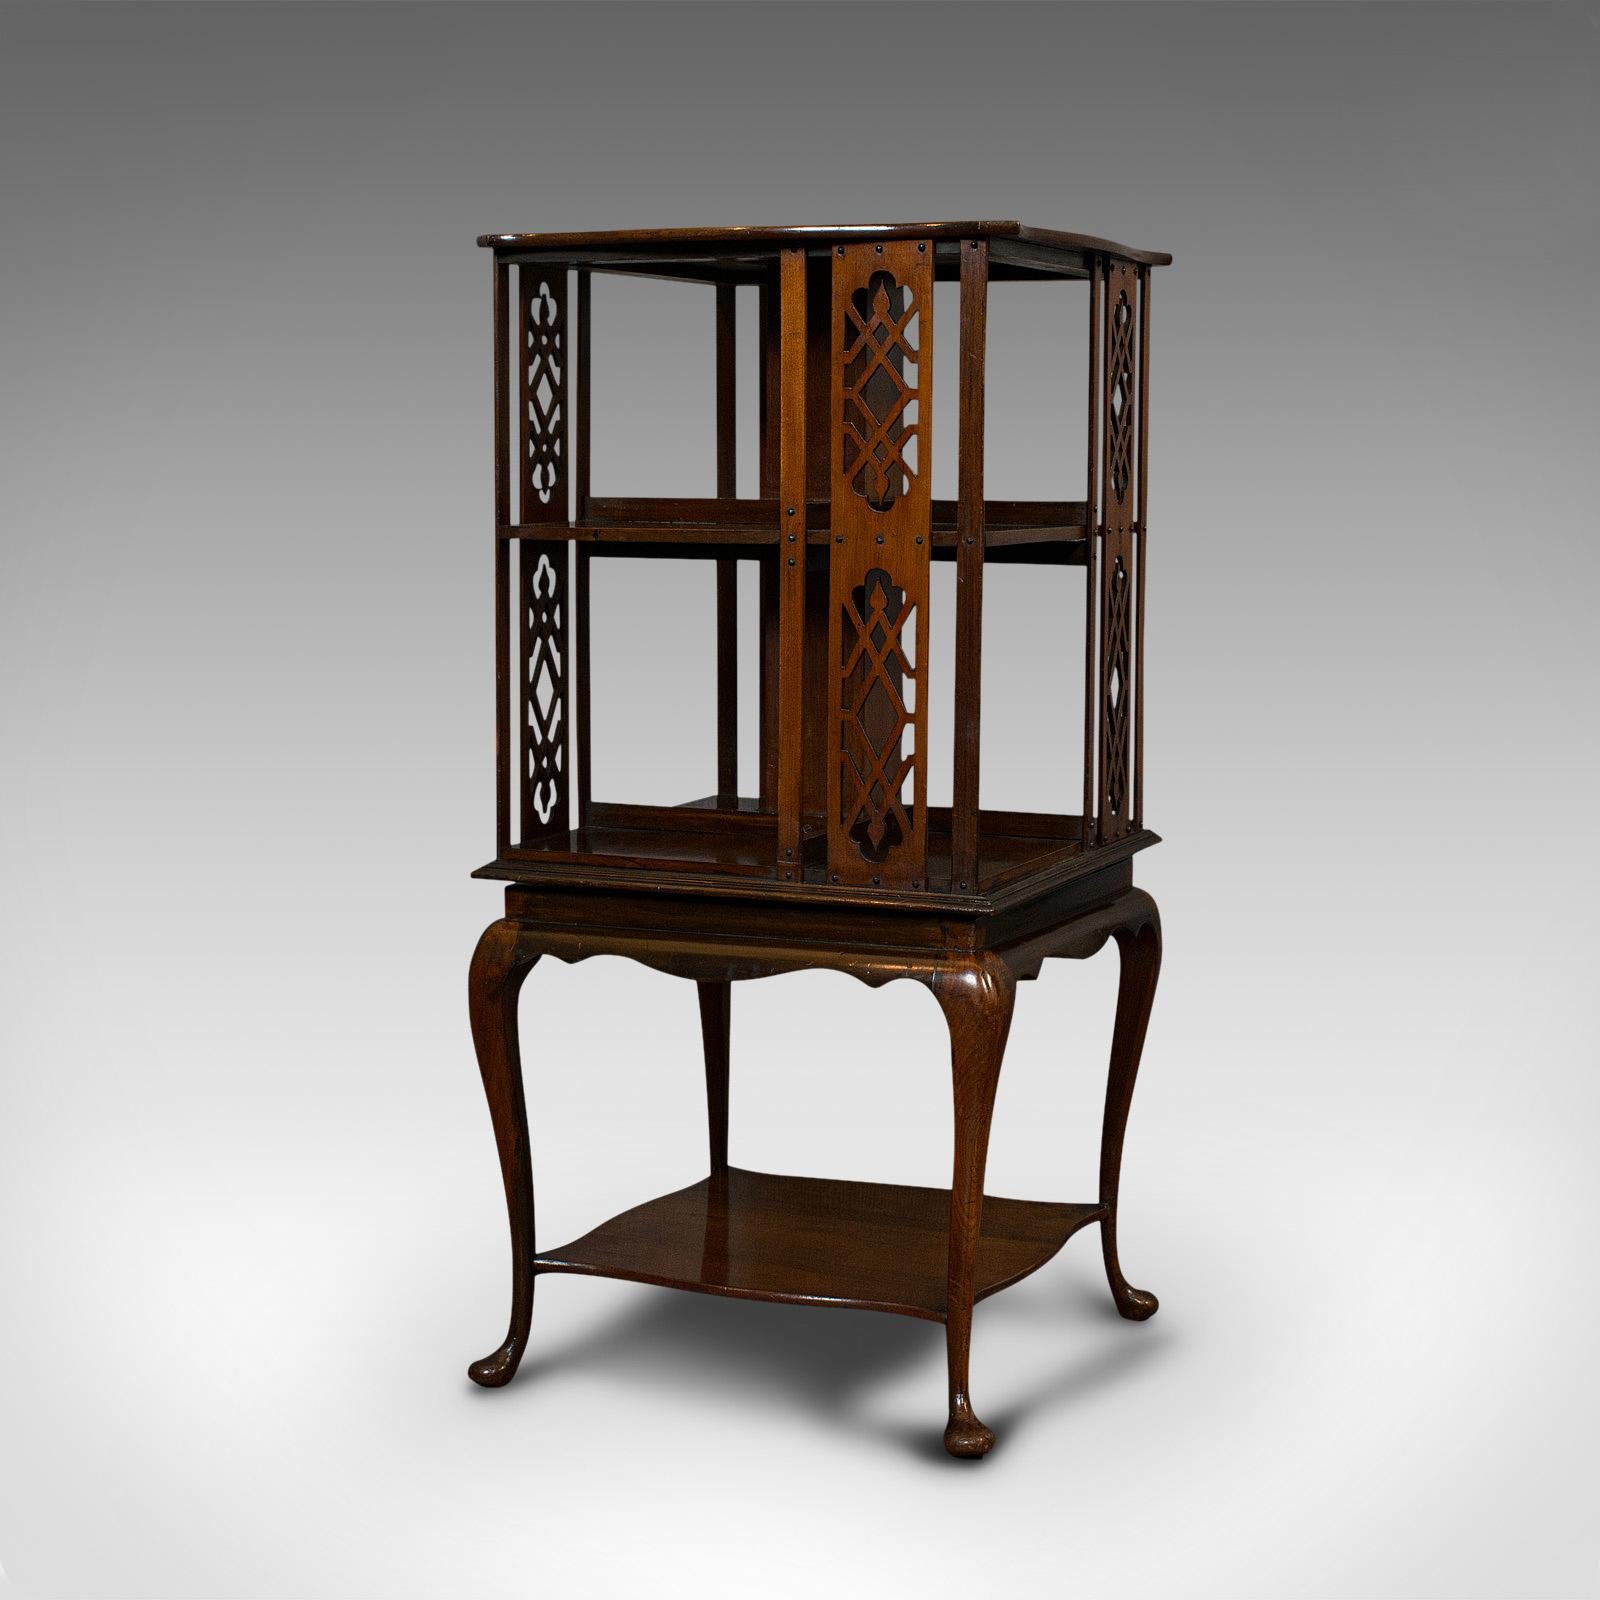 Hand-Carved Antique Revolving Library, English, Walnut, Bookcase Table Edwardian, circa 1910